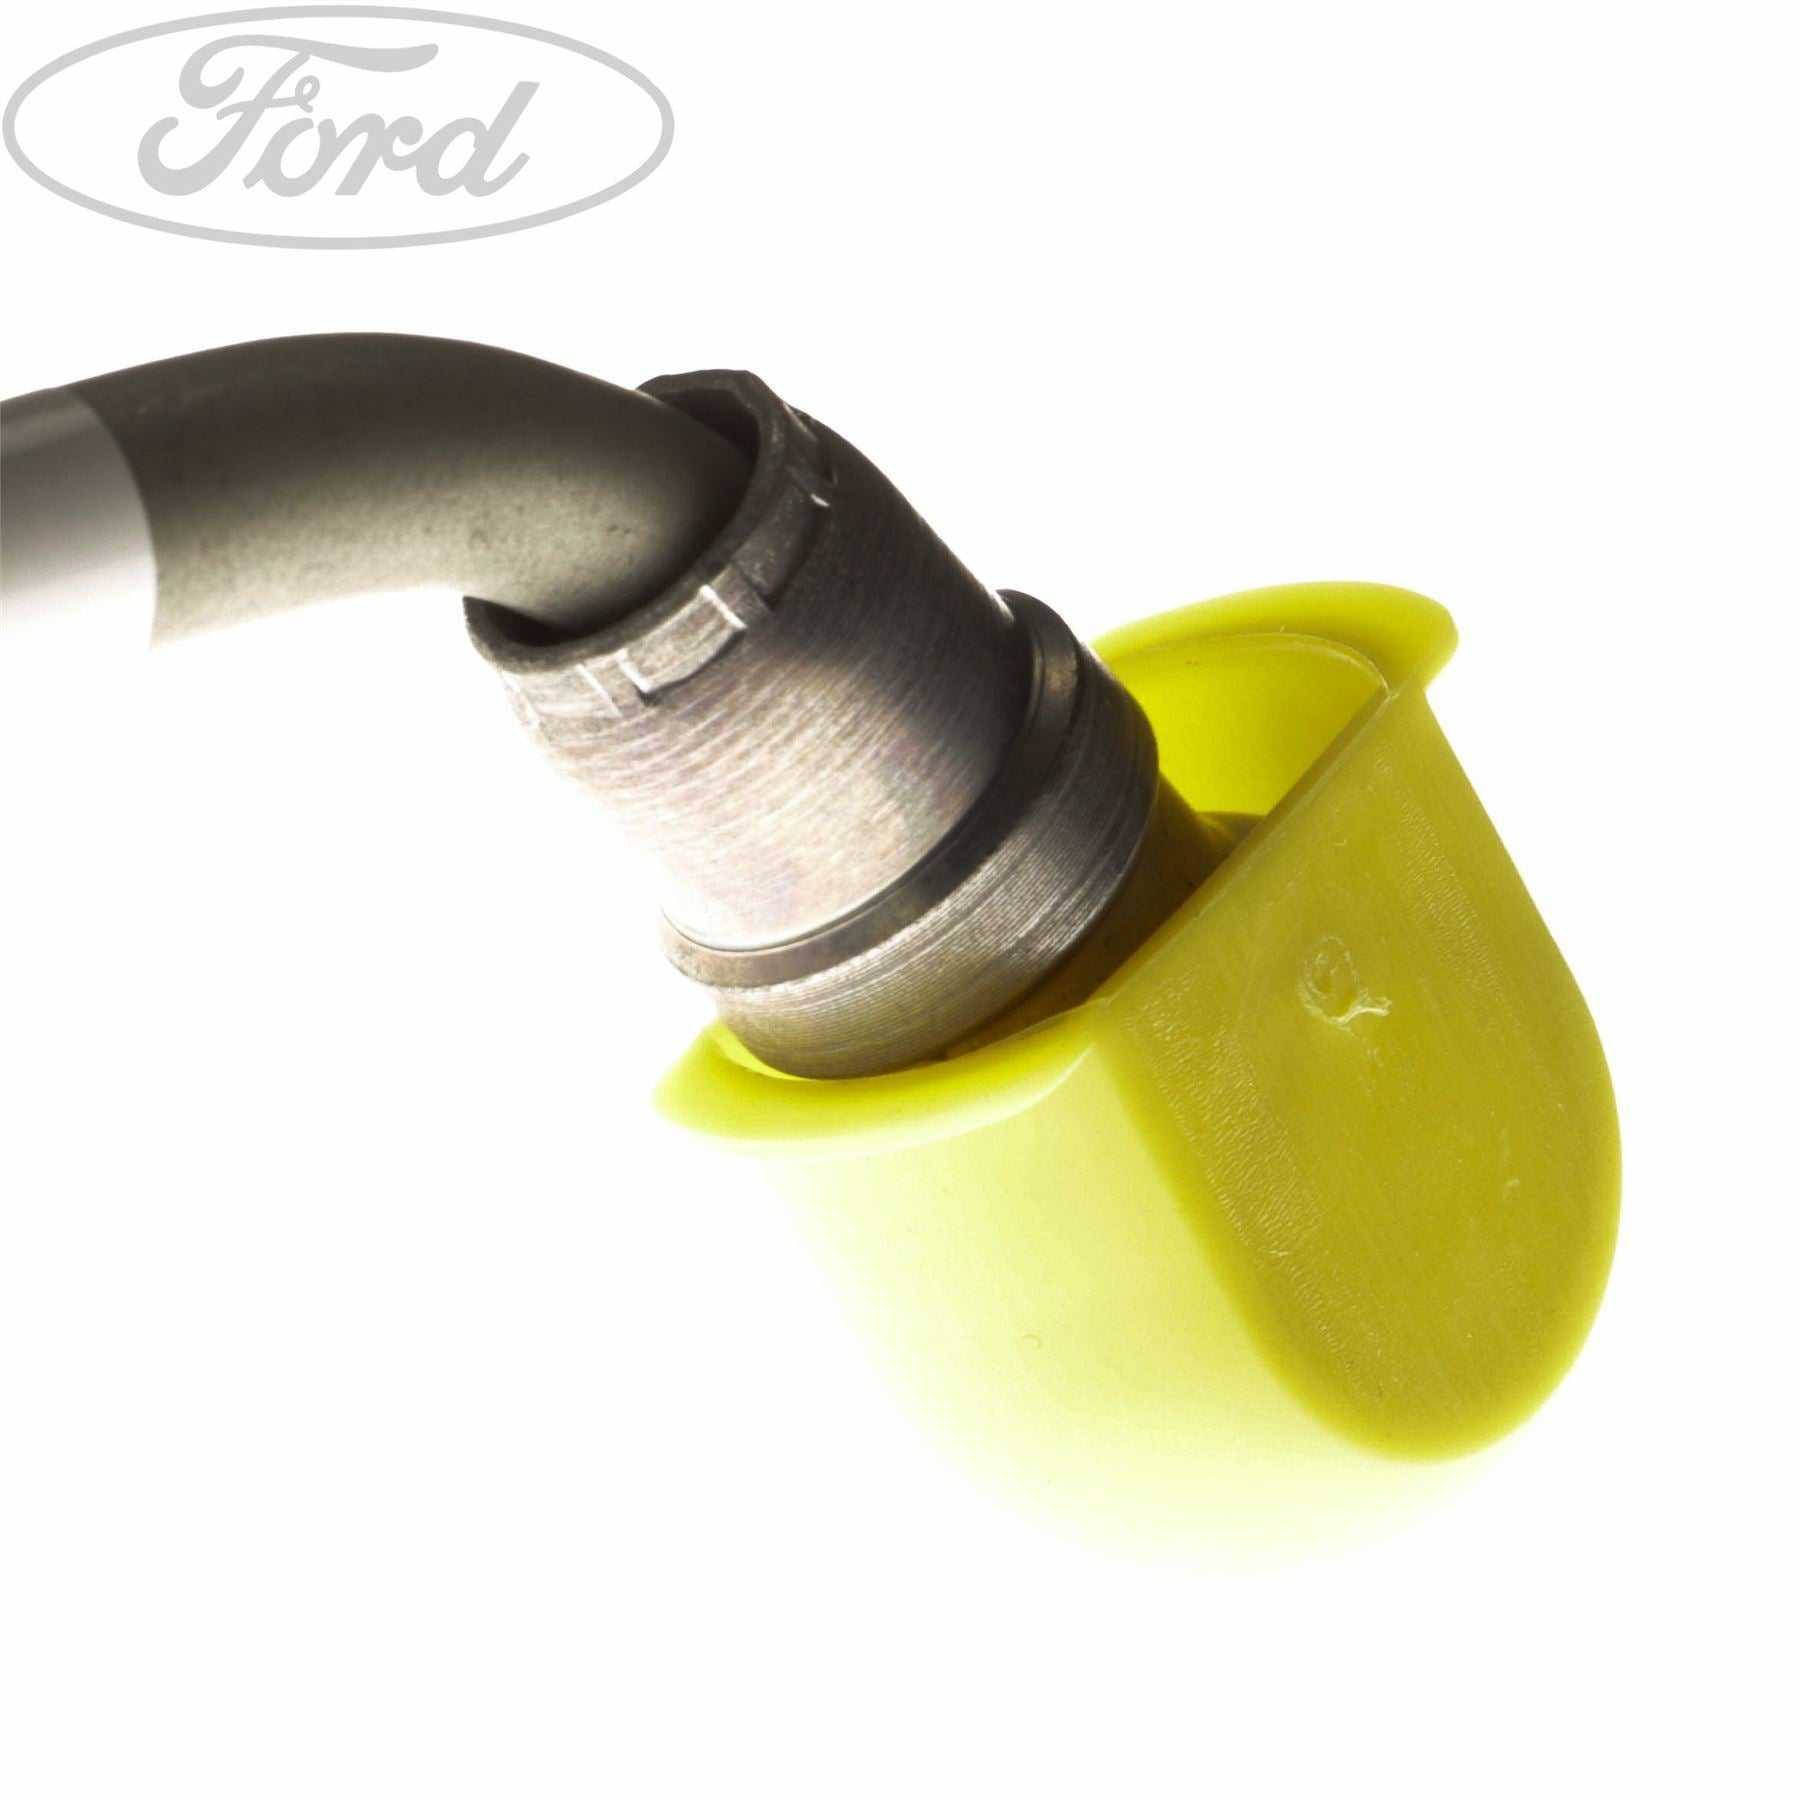 Ford, TURBO OIL FEED PIPE